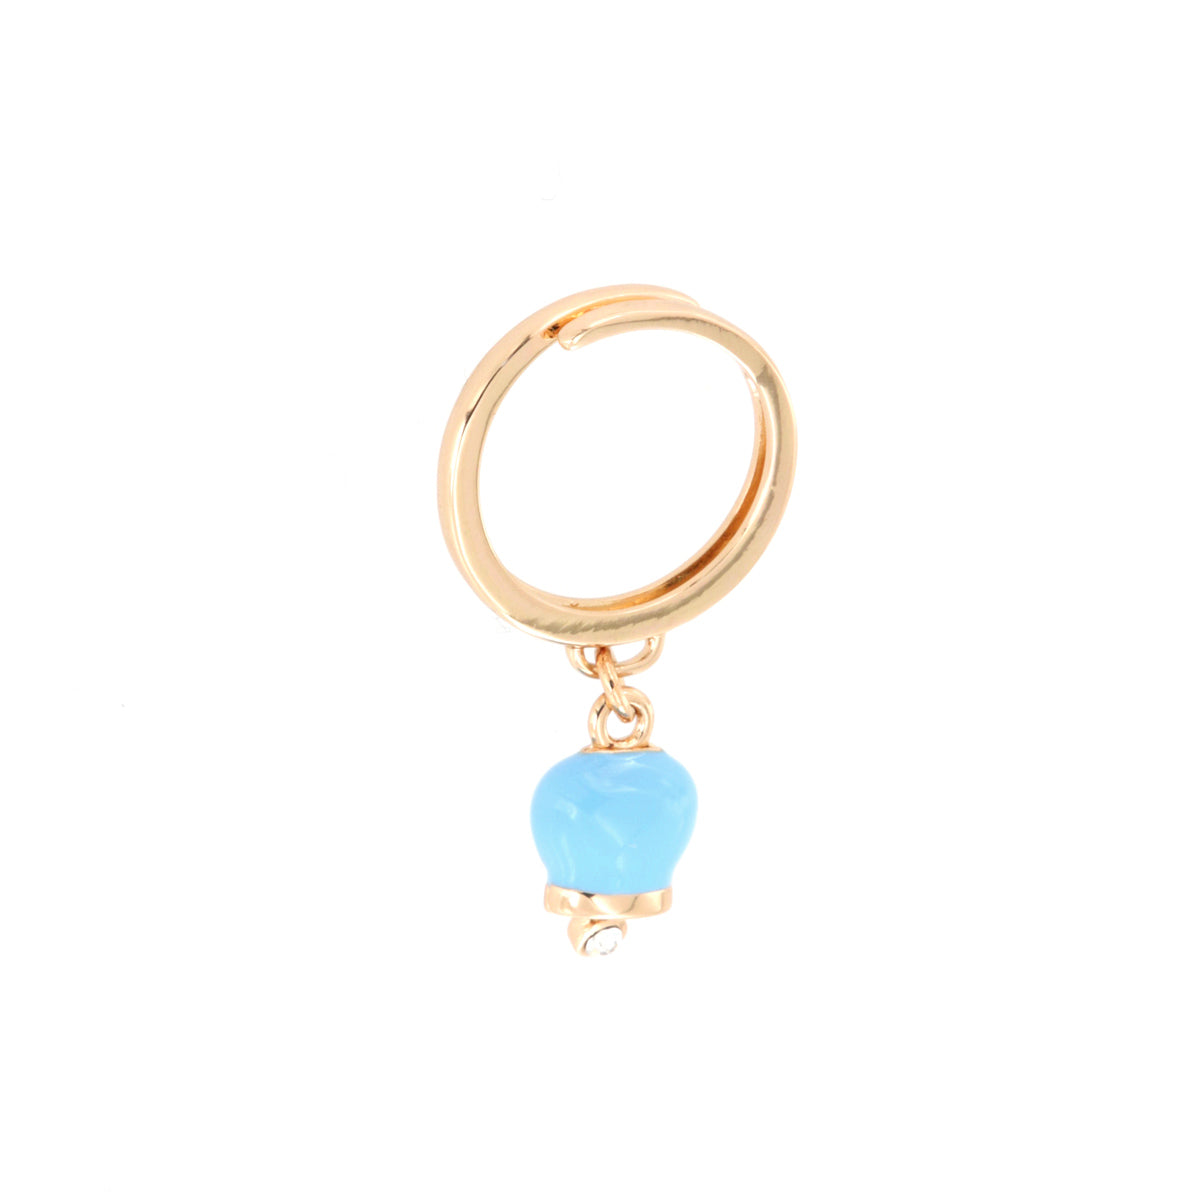 Metal ring with pendant lucky charm, embellished with turquoise enamel and light point